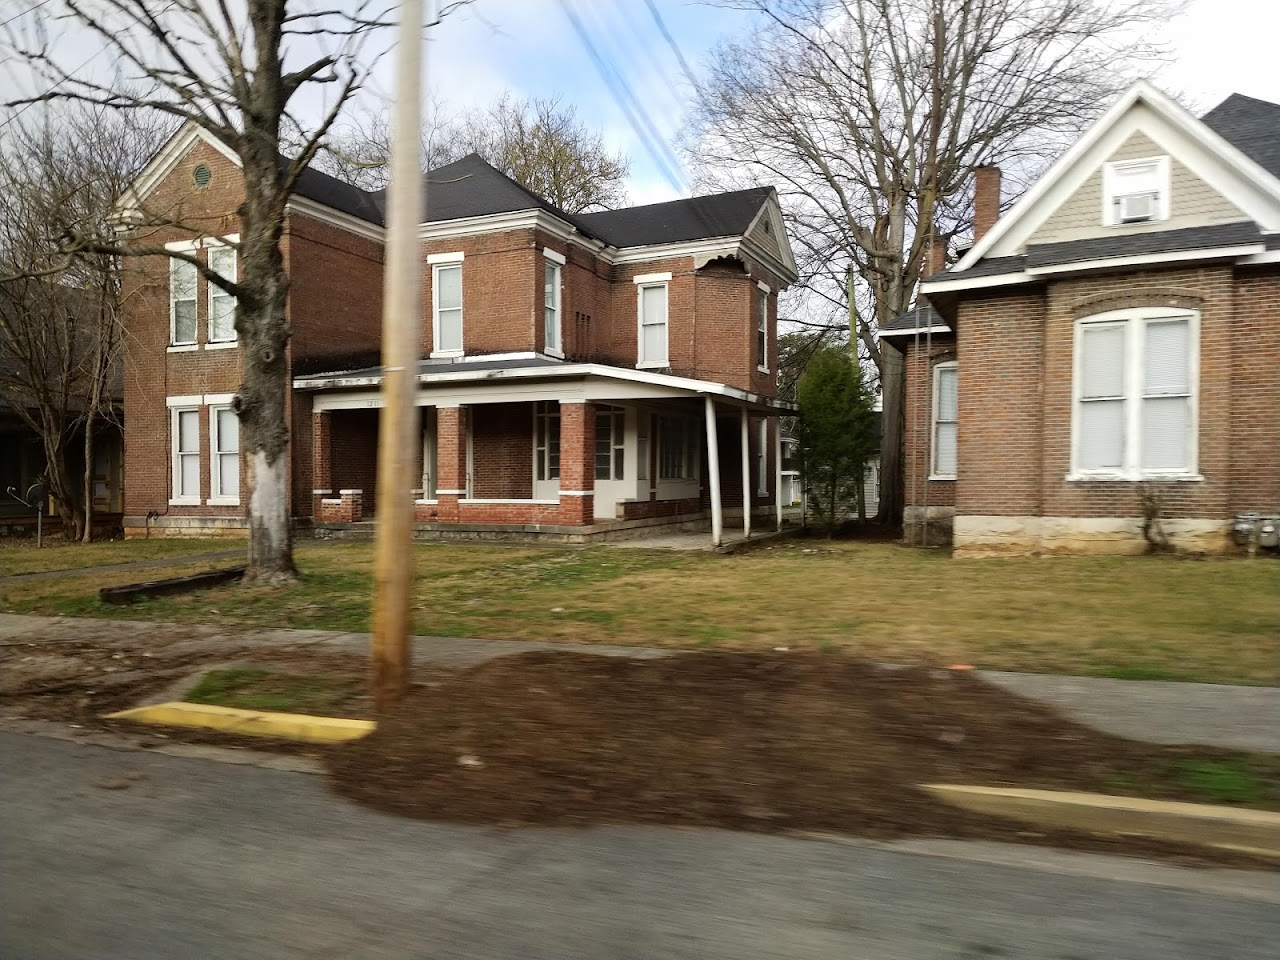 Photo of GRANT VILLAGE. Affordable housing located at 12TH AVE. EAST BOWLING GREEN, KY 42101